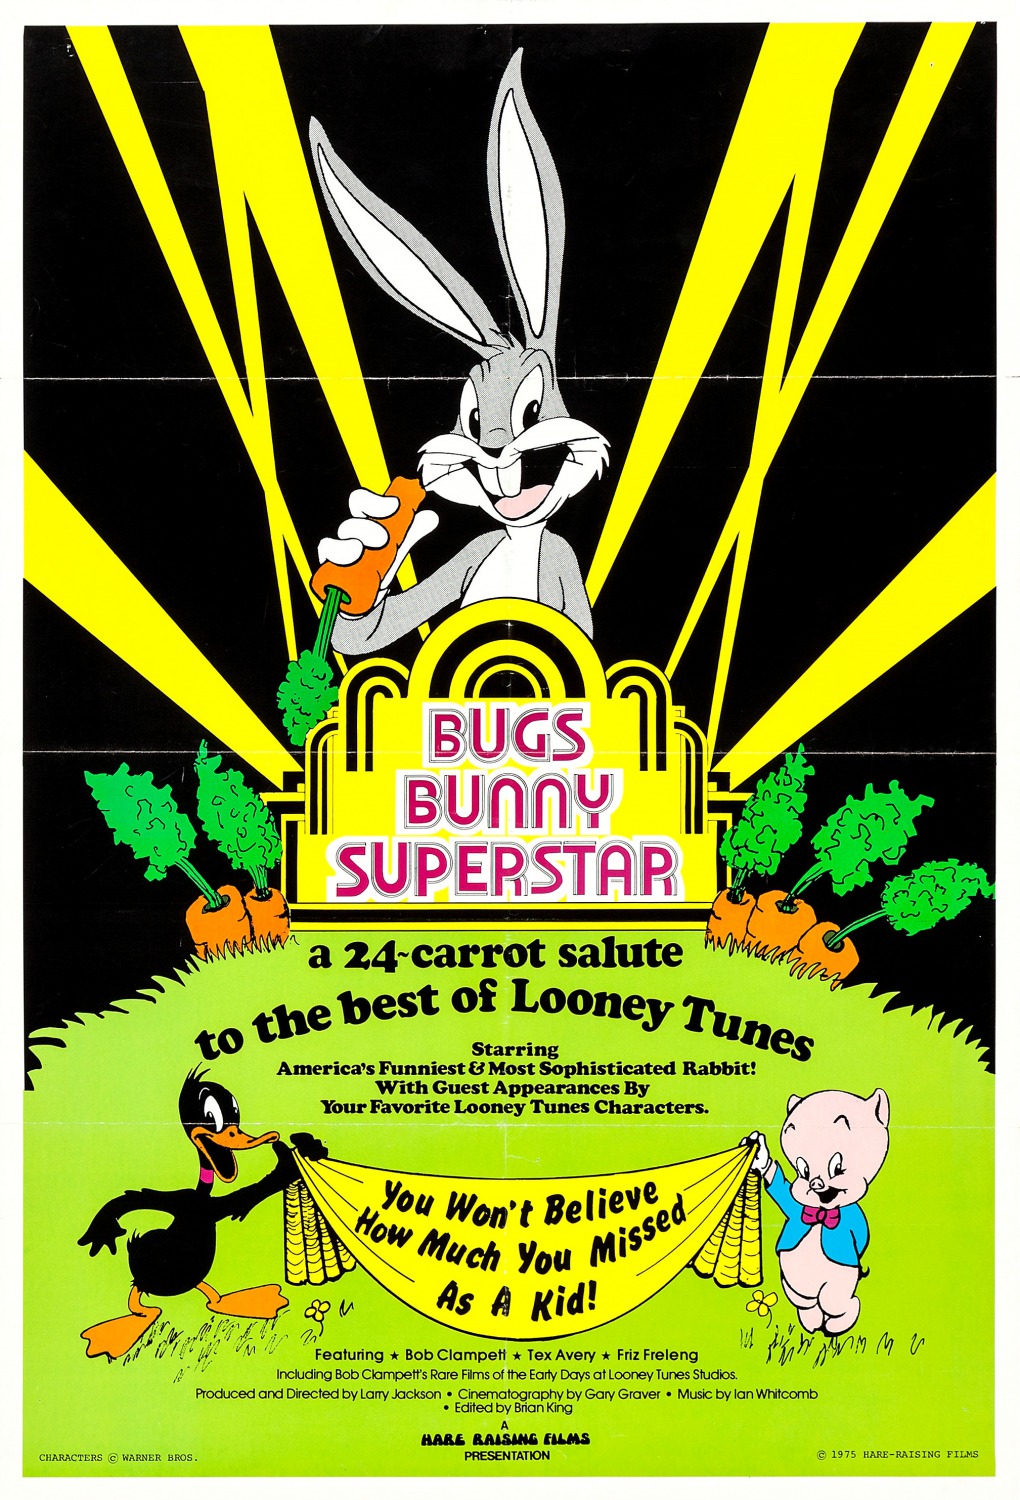 Extra Large Movie Poster Image for Bugs Bunny Superstar 